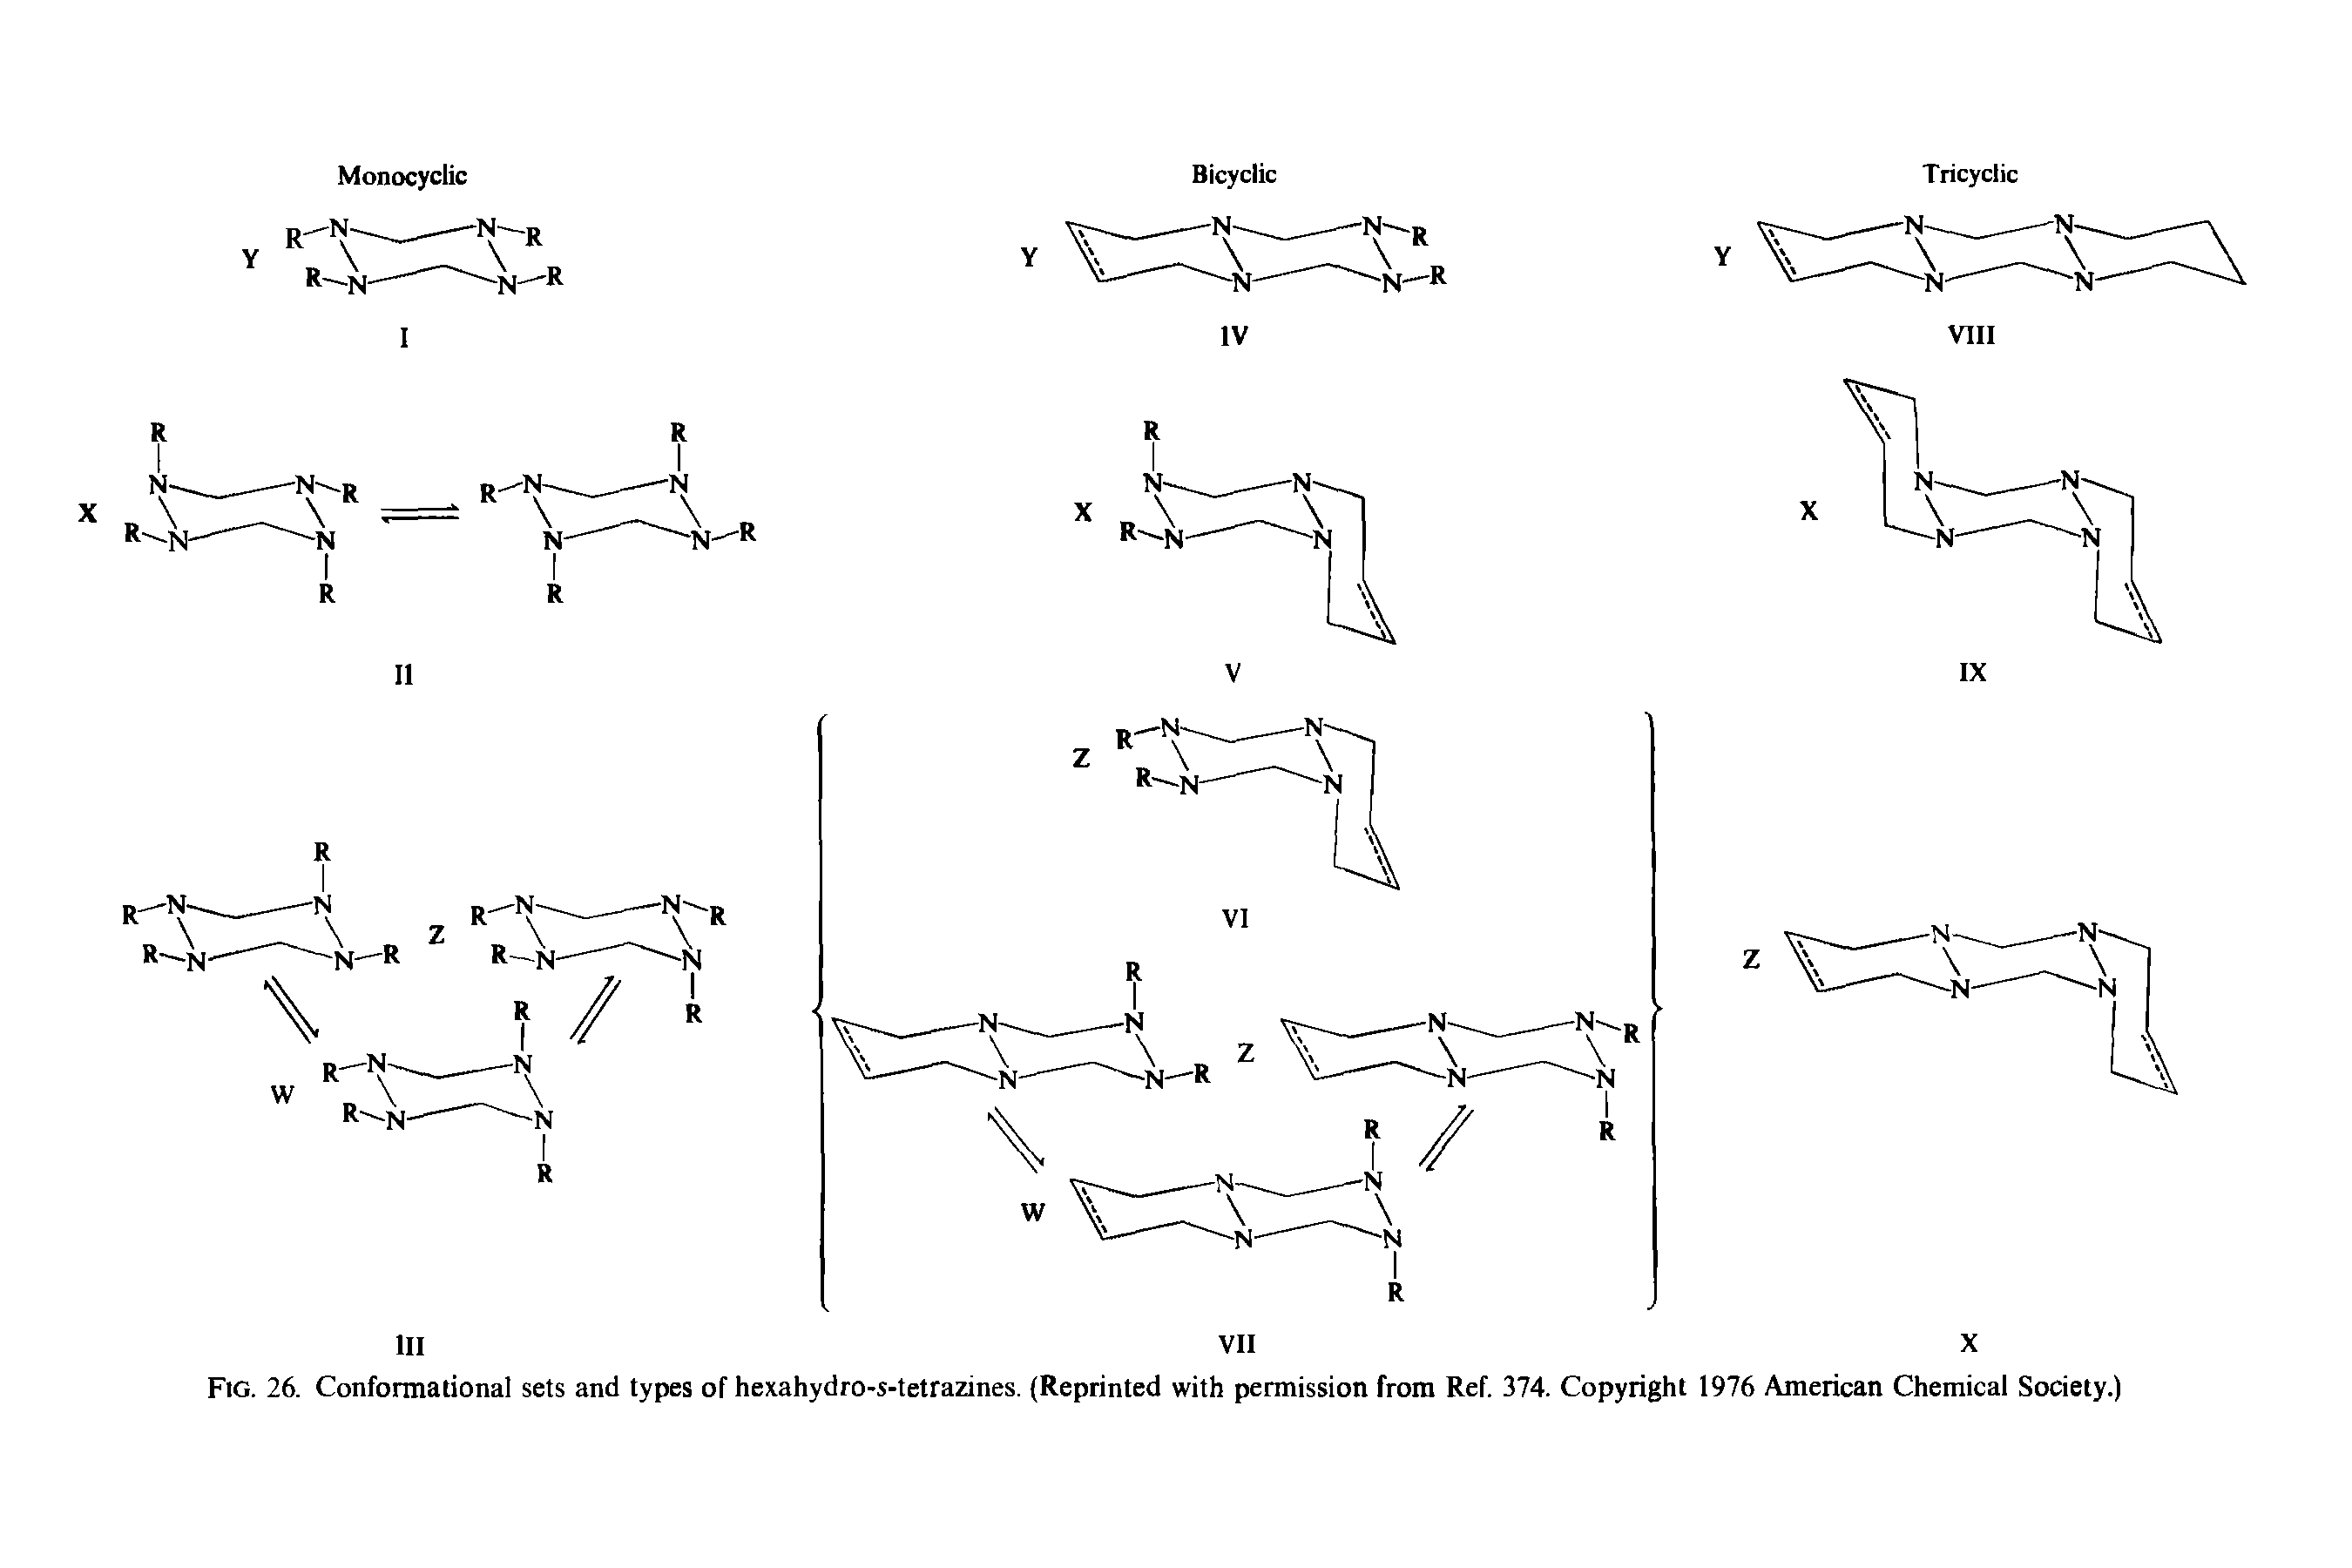 Fig. 26. Conformational sets and types of hexahydro-s-tetrazines. (Reprinted with permission from Ref. 374. Copyright 1976 American Chemical Society.)...